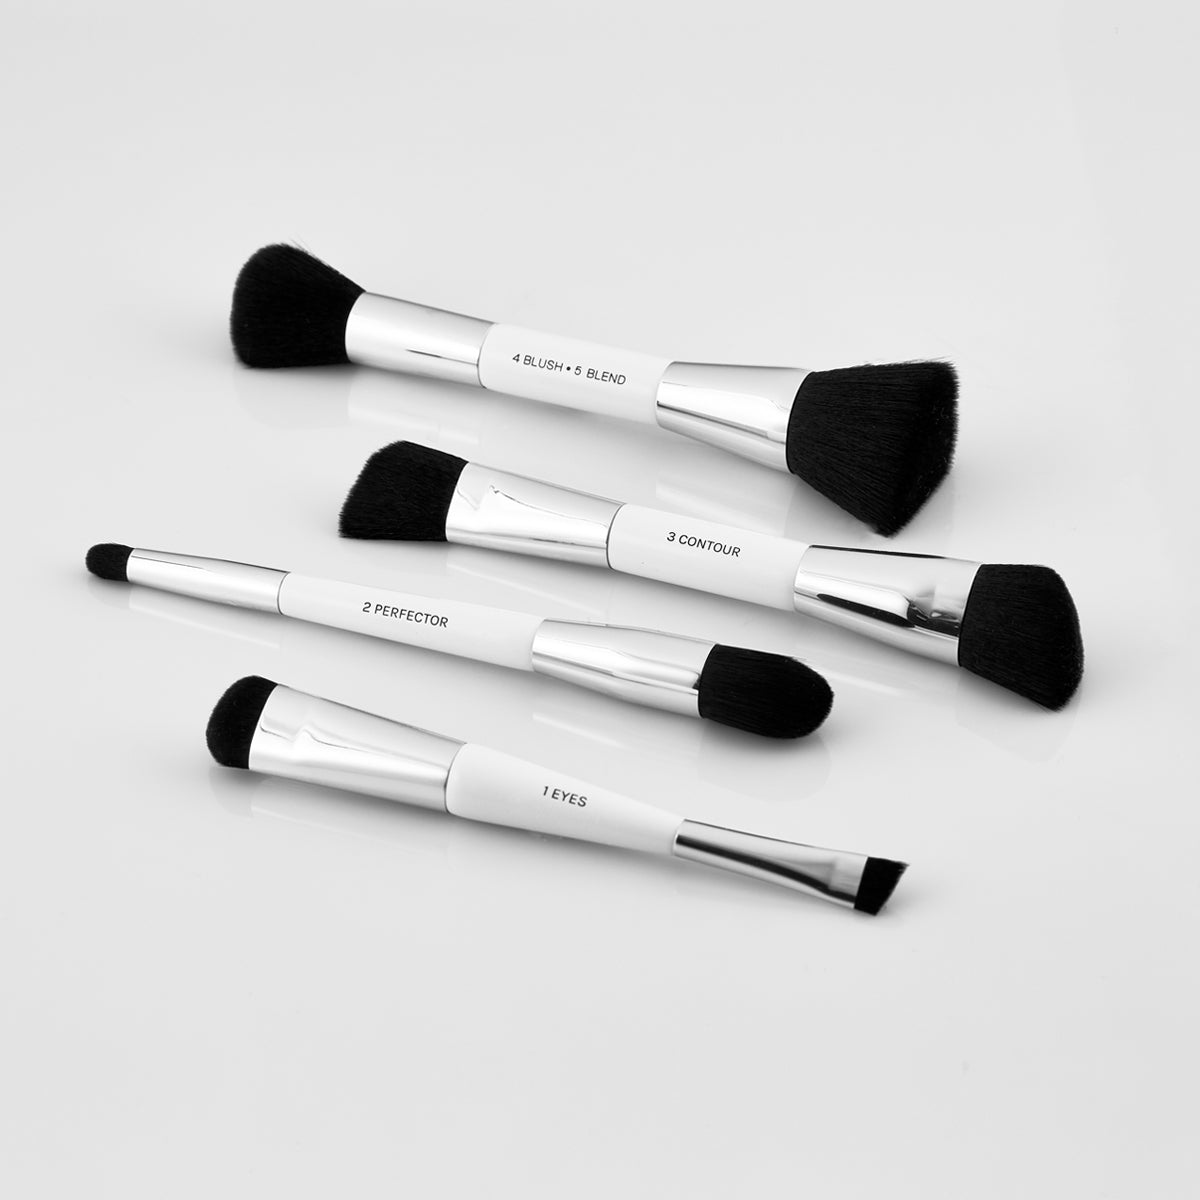 4 Dual ended Essential Brushes. 1 eyes, 2 perfector brush, 3 contour, 4 blush, 5 belnd